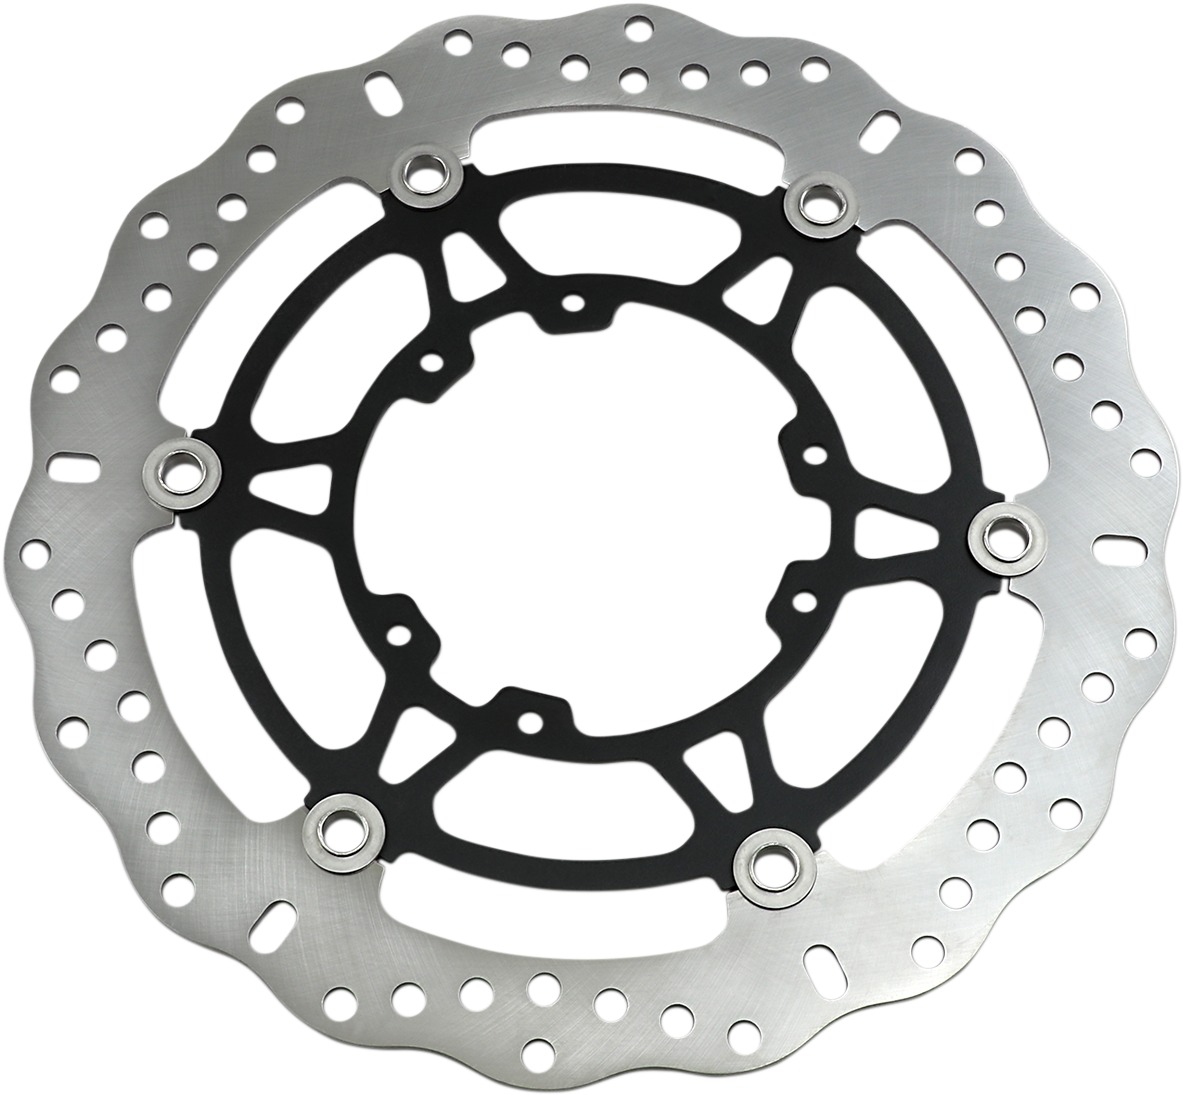 Front Contour Brake Rotor - For 17-20 Honda CRF250L Rally - Click Image to Close